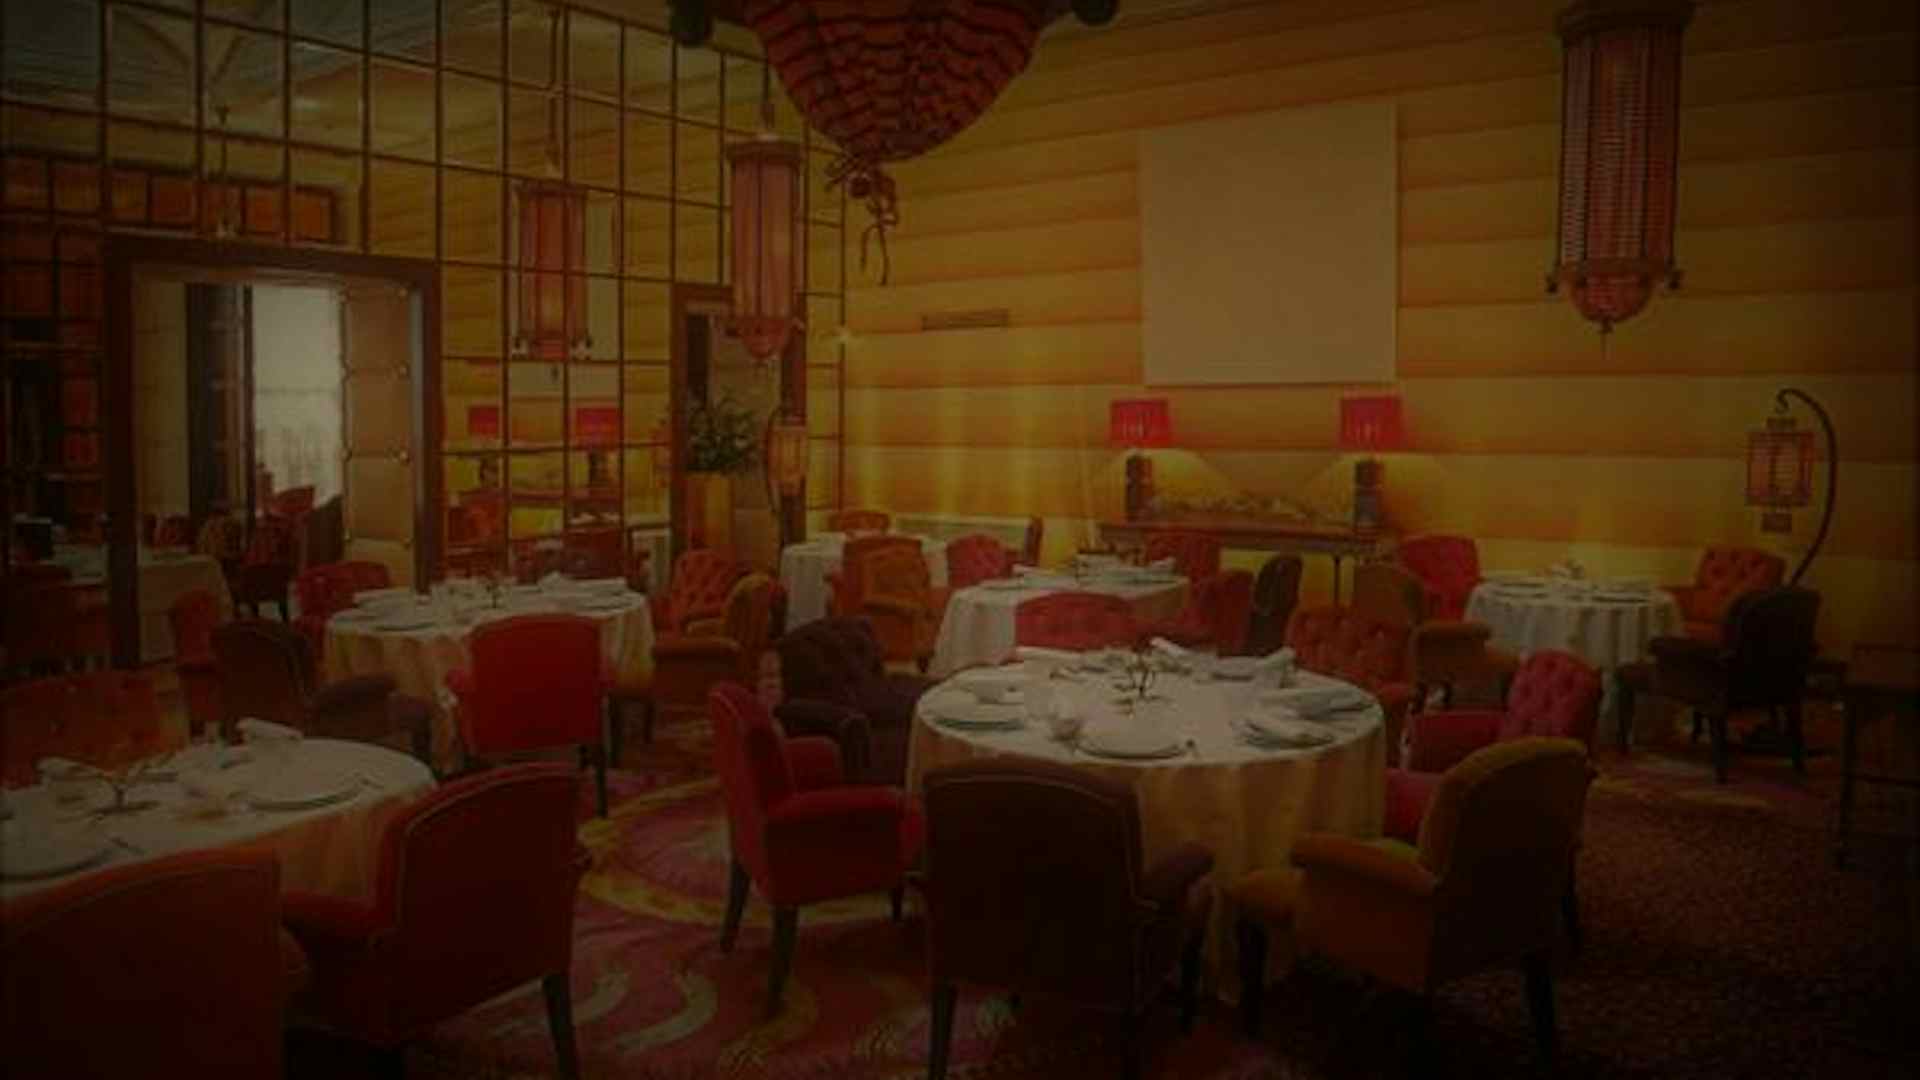 7 Delicious Private Dining Spots To Tantalise Your Taste Buds